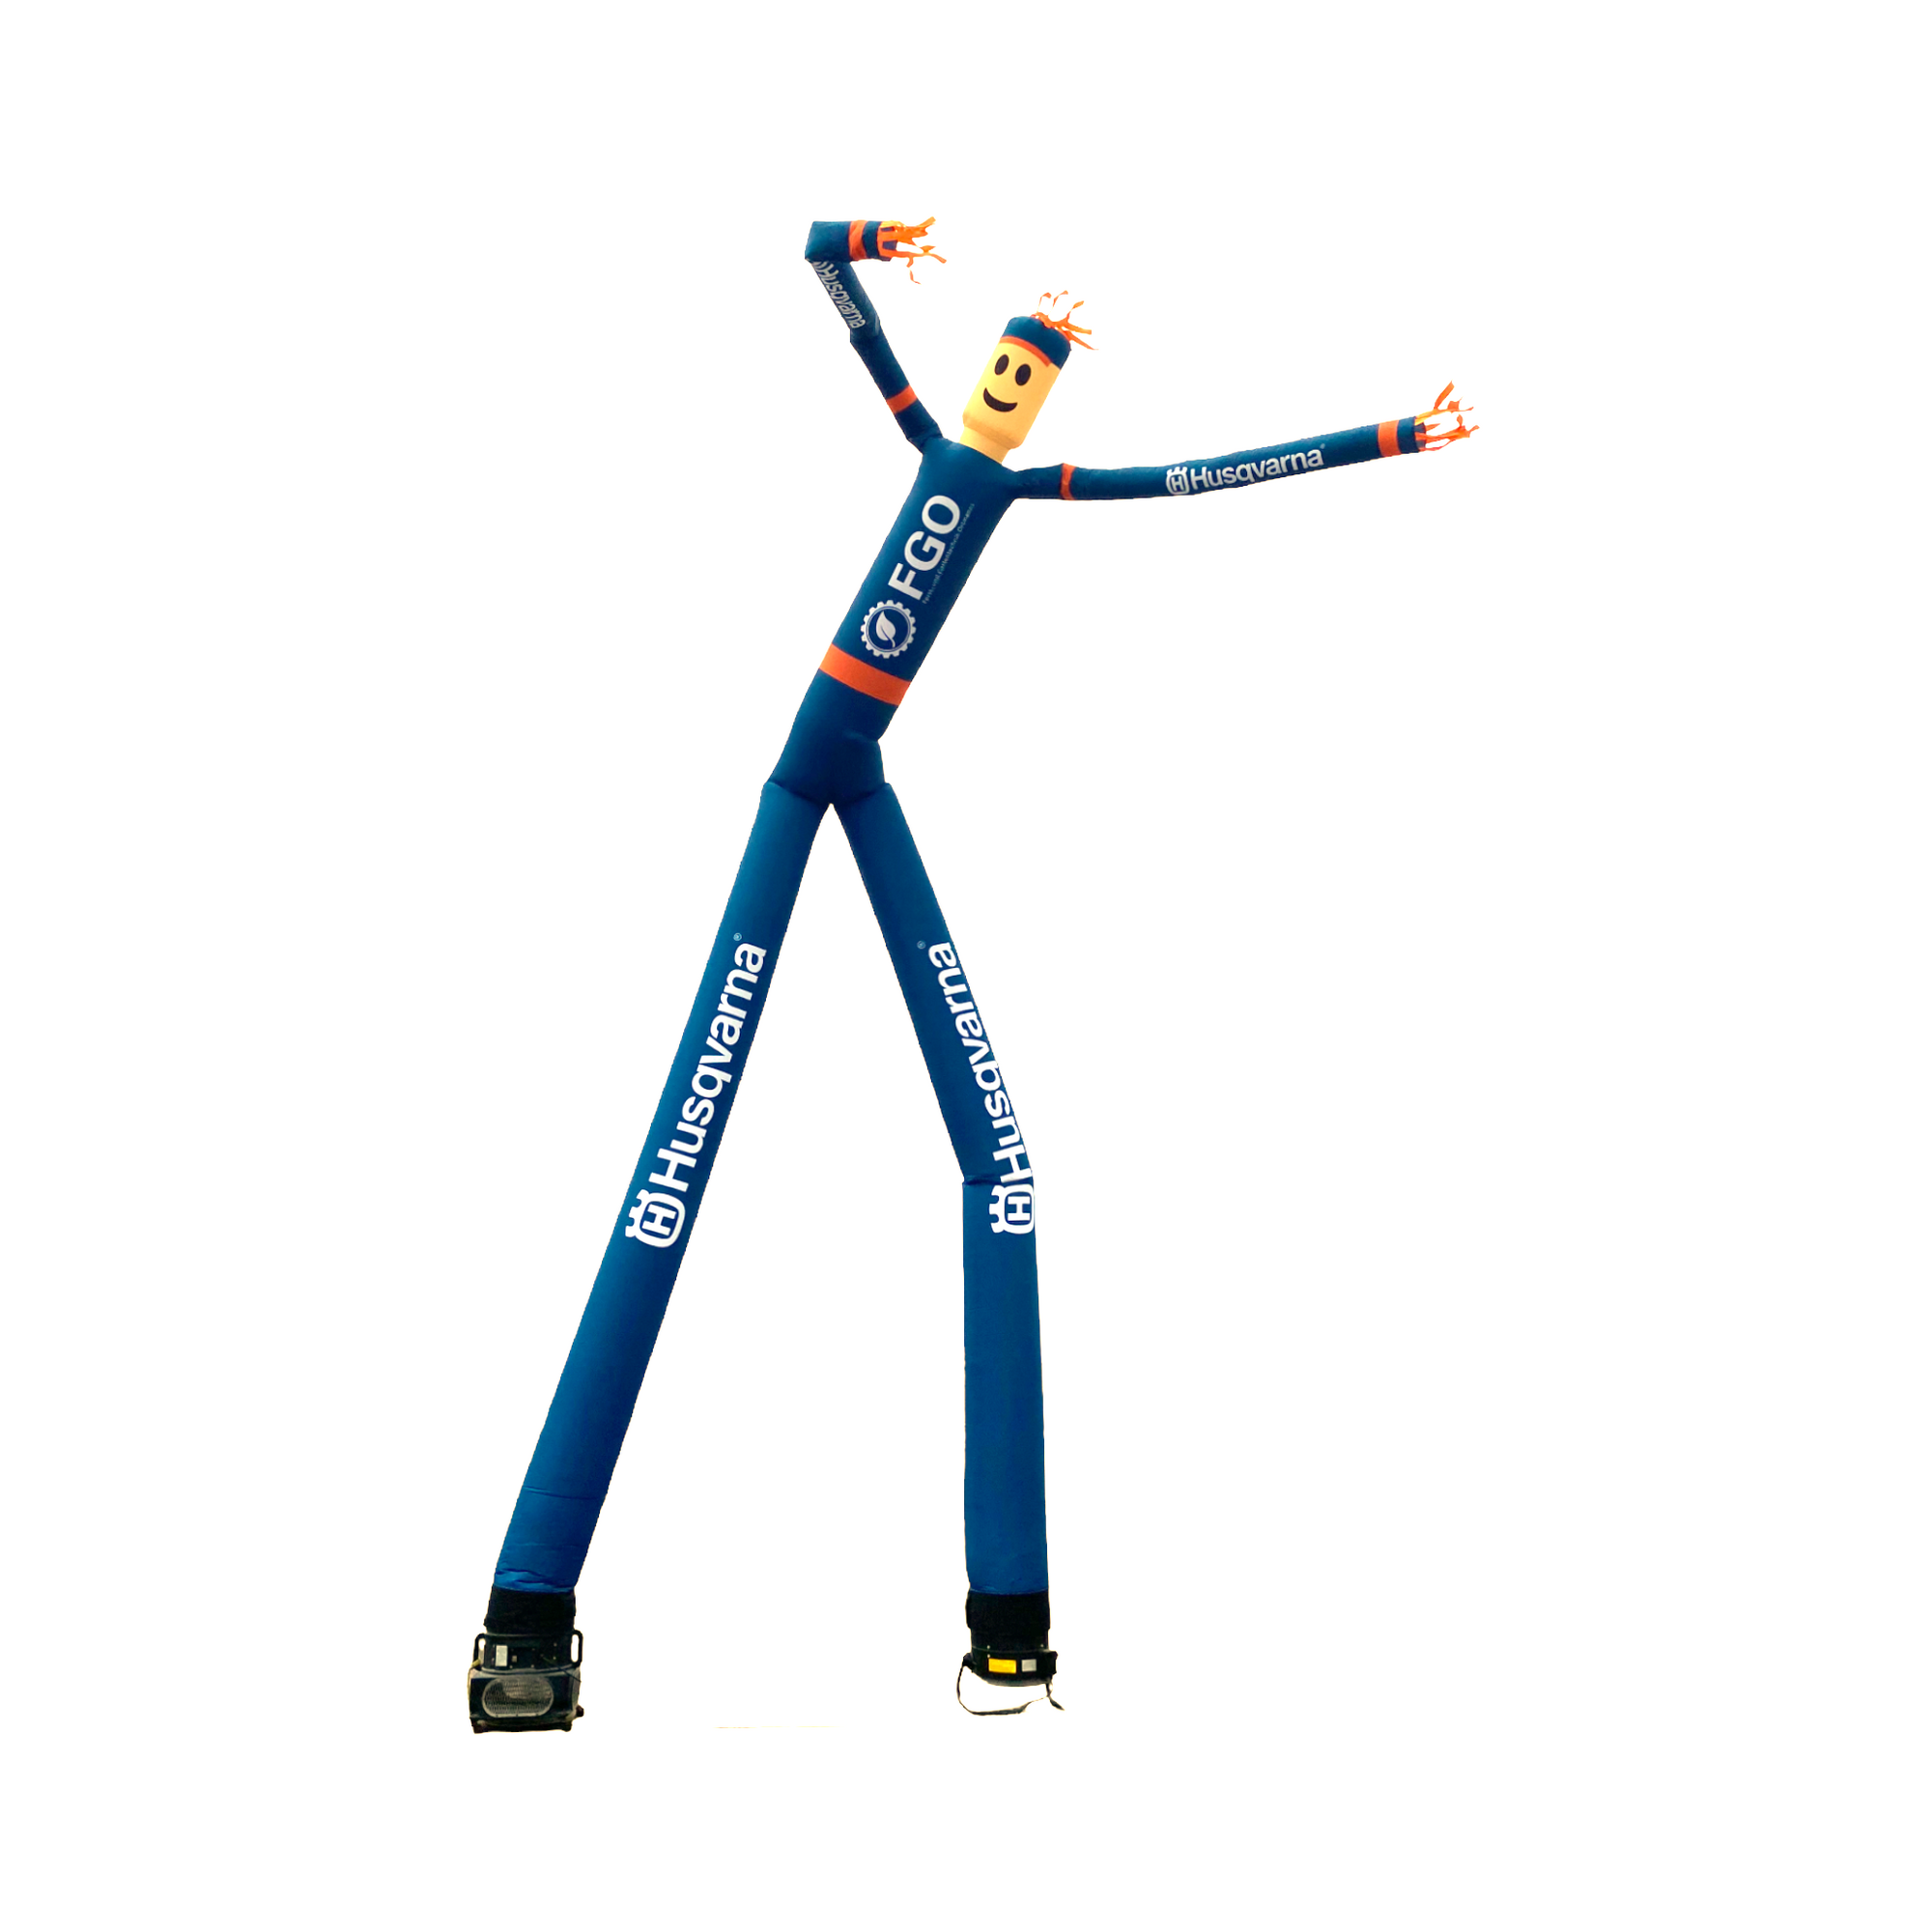 Airdancers- two arms / two legs 100% digital printing 8 m - 26 ft - Inflatable24.com